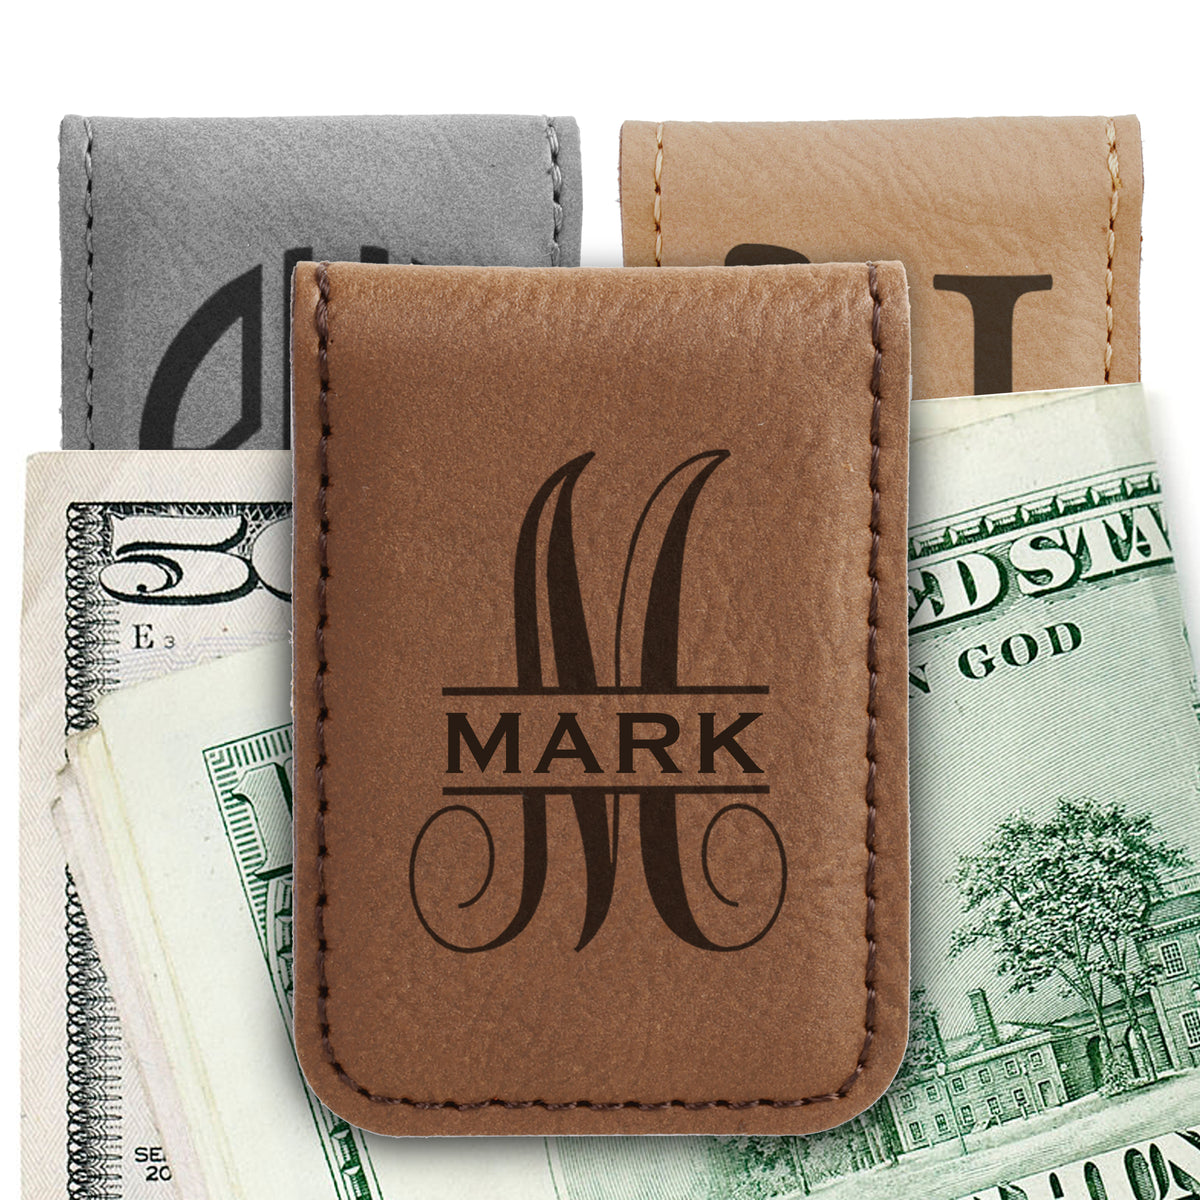 Personalized leather money clip, Money clip engraved, gift for him, Leather money clip, Groomsman money clips, Engraved leather